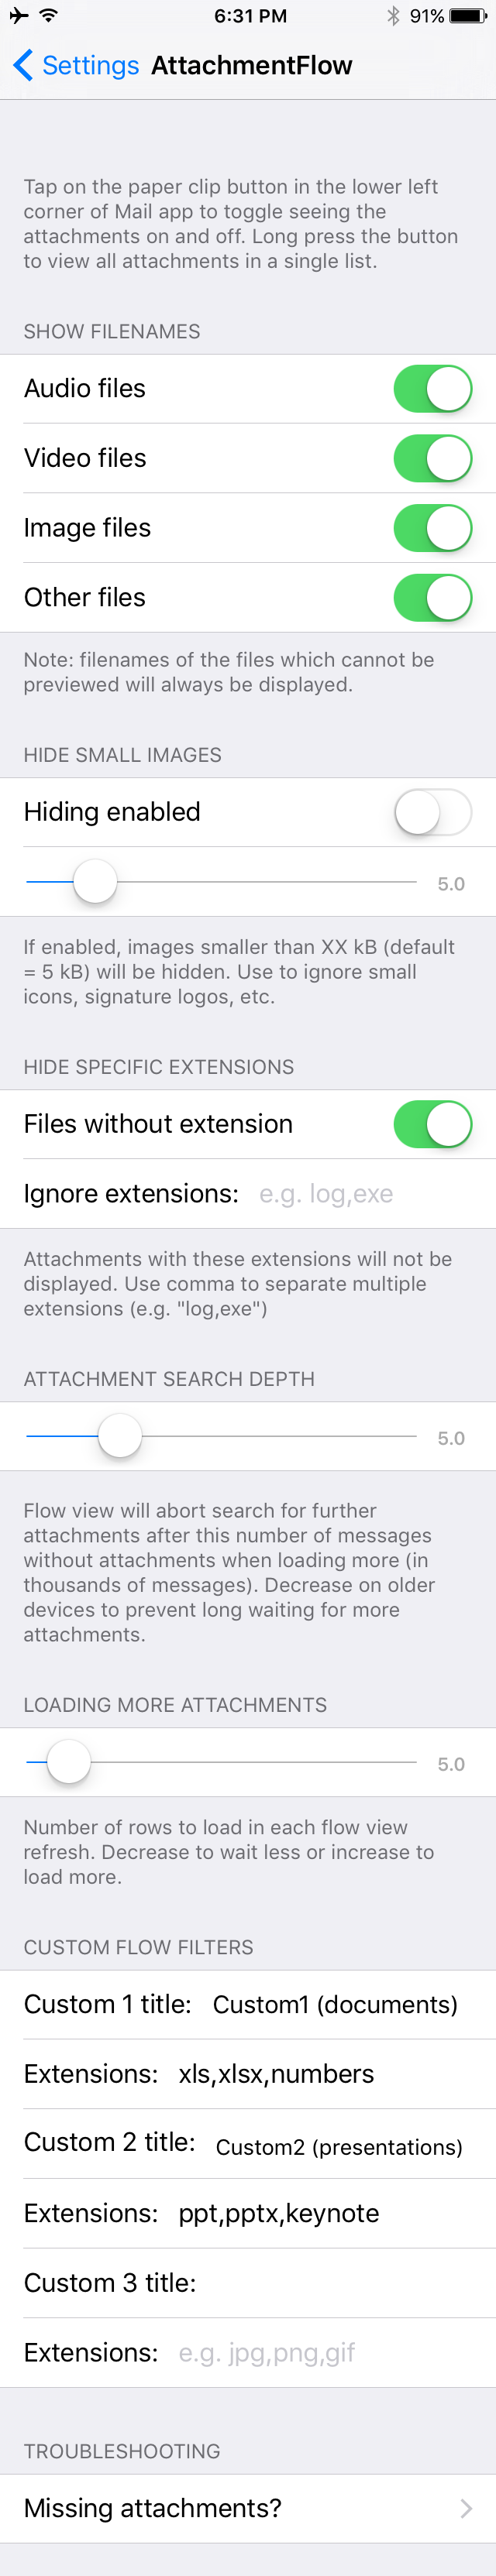 attachment-flow-review-settings